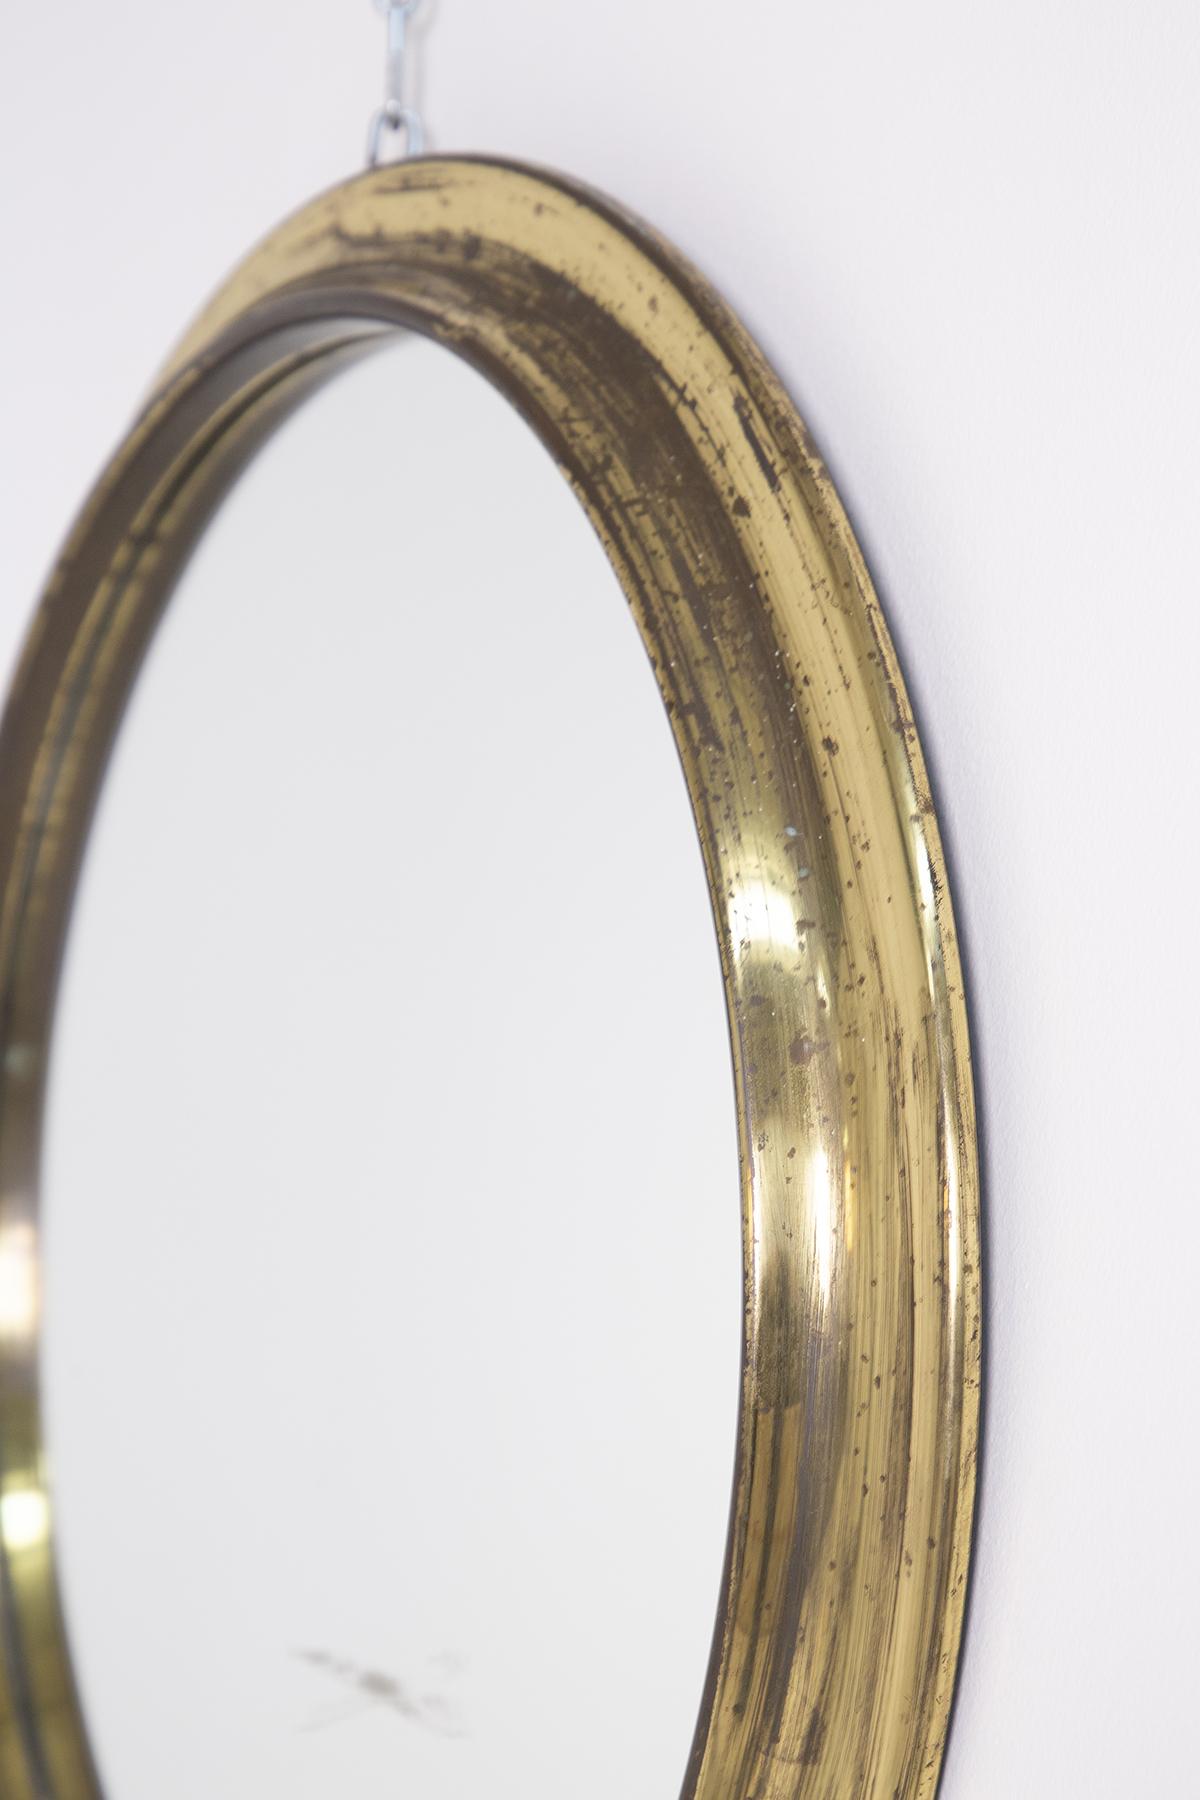 Beautiful round mirror designed by Augusto Savini in the 70's.
The frame of the mirror was made of fine gilded brass, which gives a touch of extra shine when mirrored.
The Augusto Savini mirror has a beautiful patina of the brass, it is ideal for